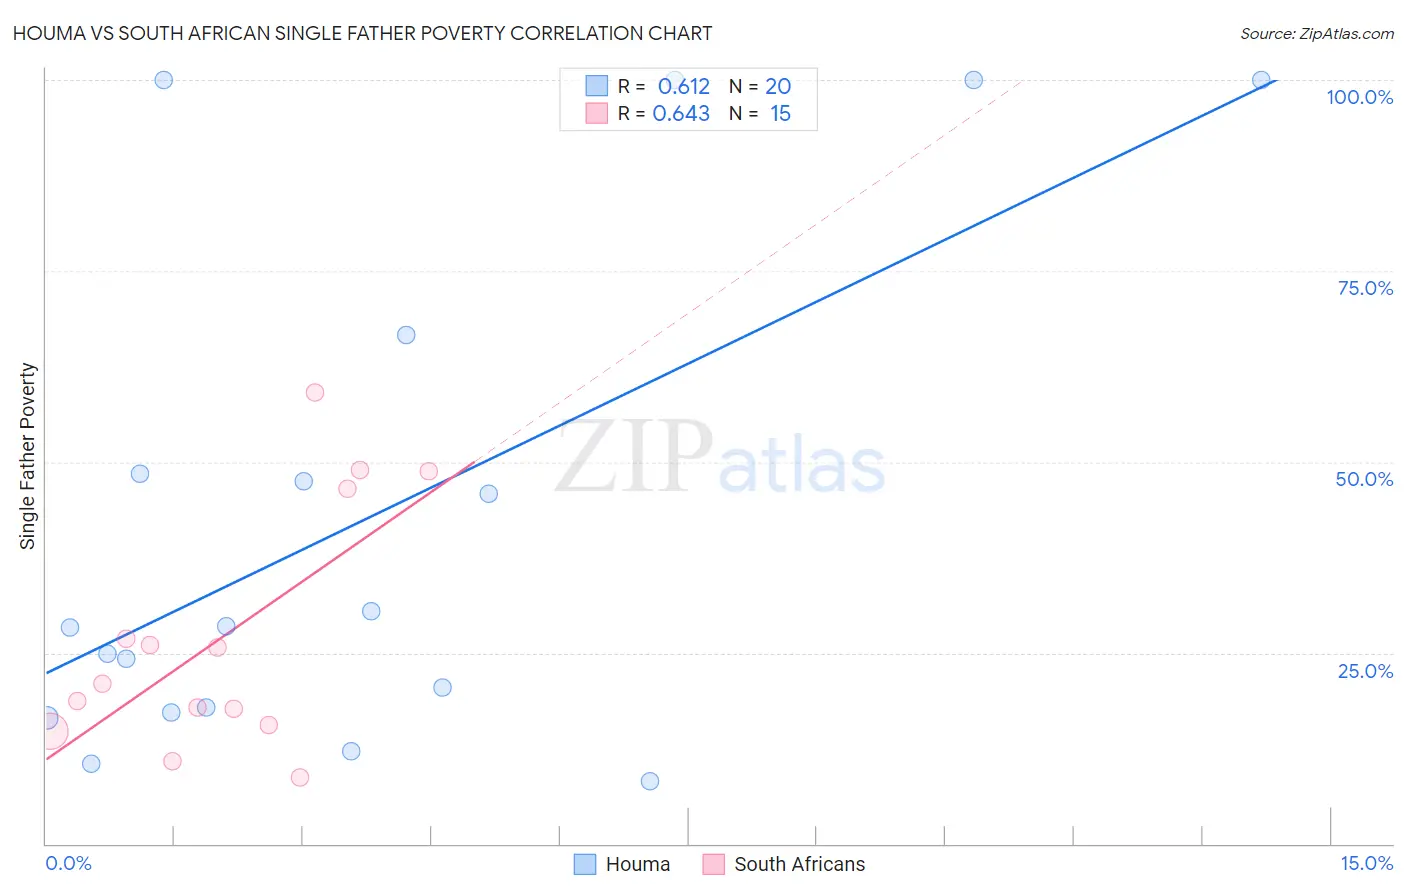 Houma vs South African Single Father Poverty